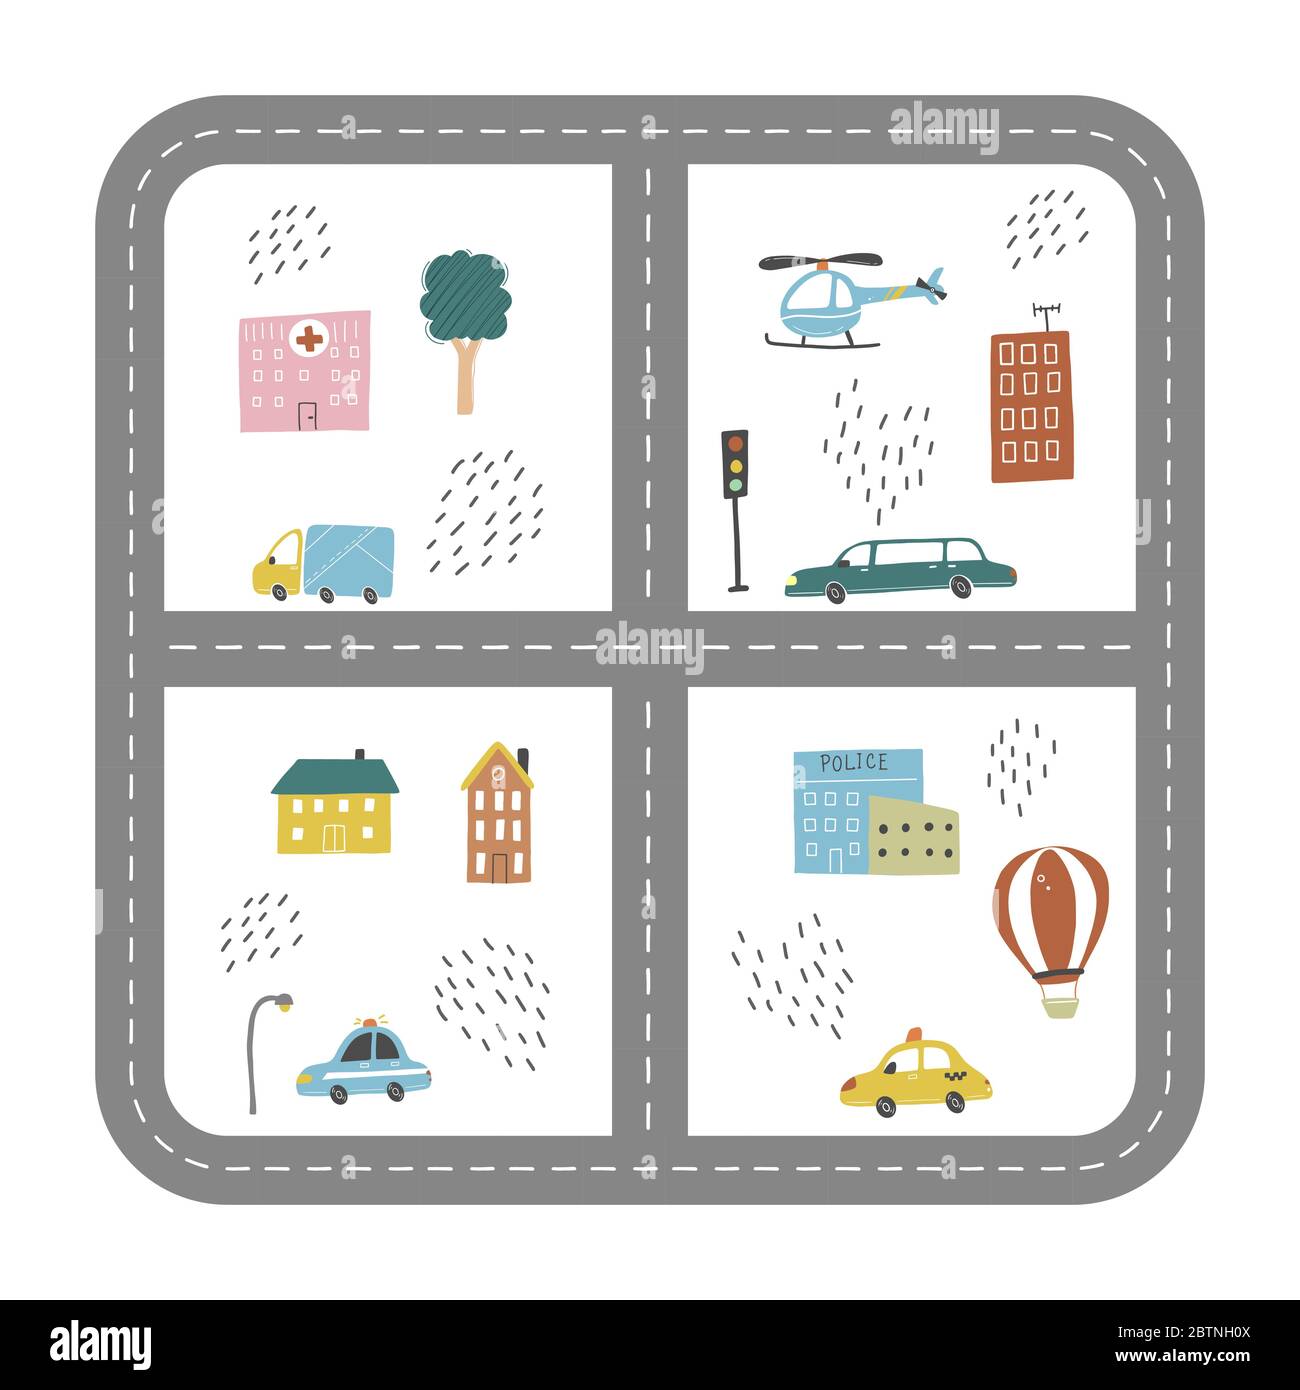 Cartoon cute kids map with car, road, city landscape elements. Cars, building, road of hand drawn, children toy style. Vector illustration. Stock Vector